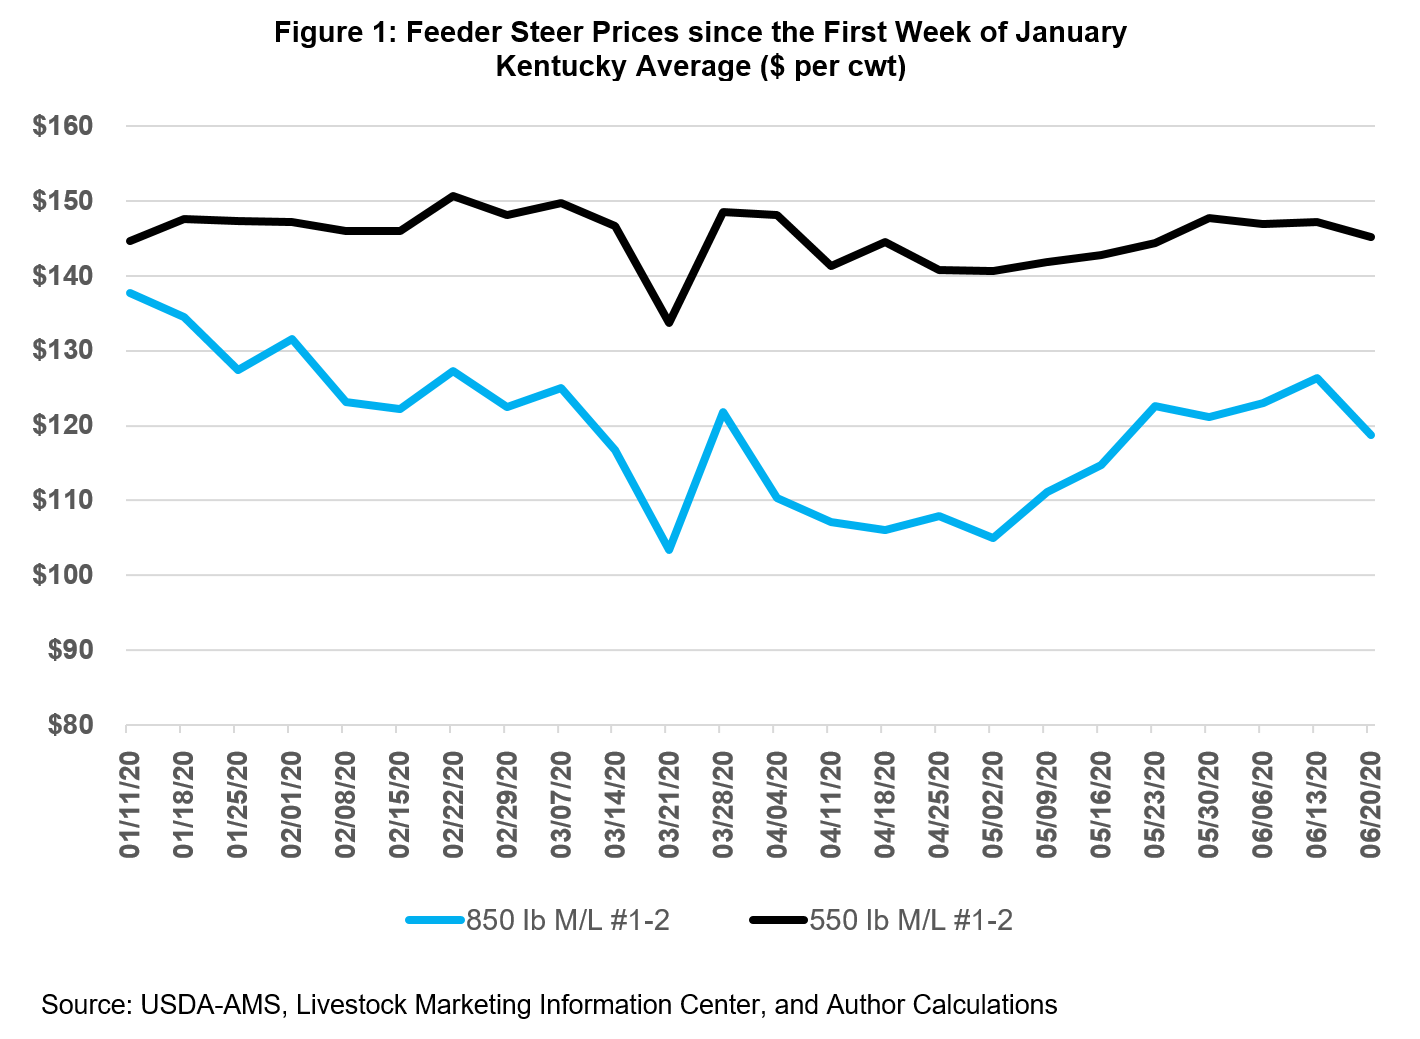 Graph of Feeder Steer Prices since the First Week of January 